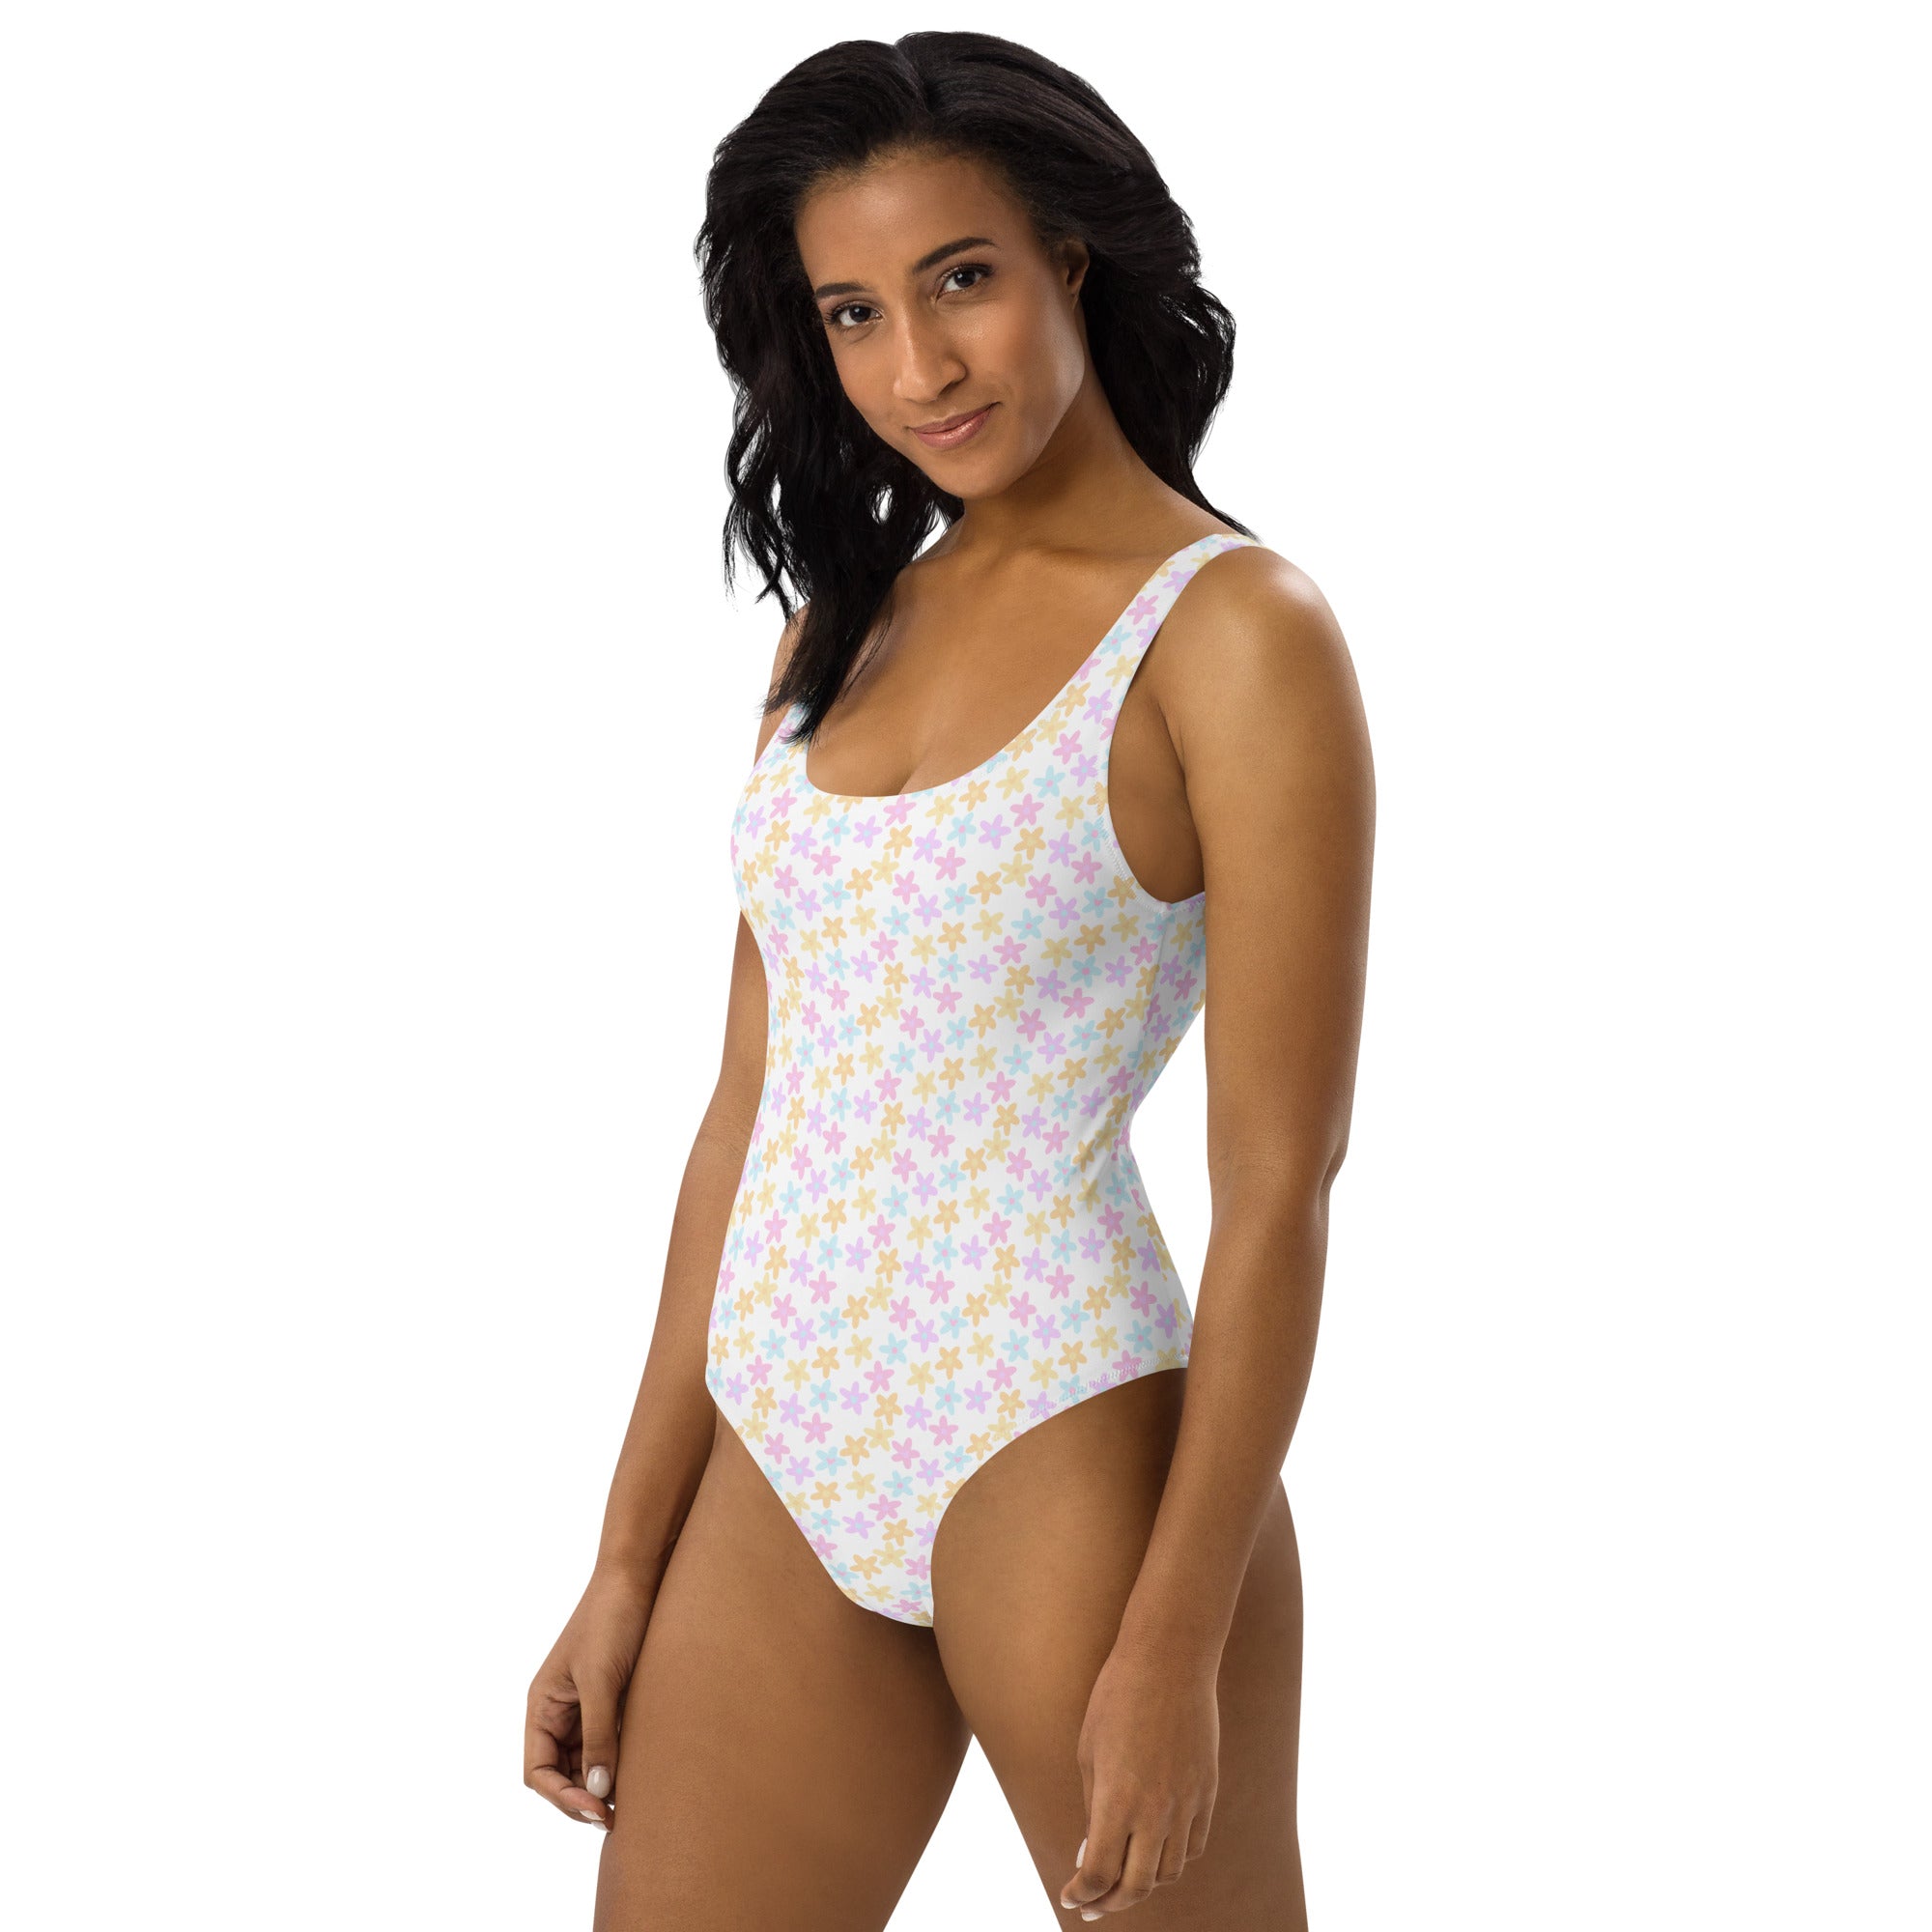 Spring Daisy One-Piece Swimsuit